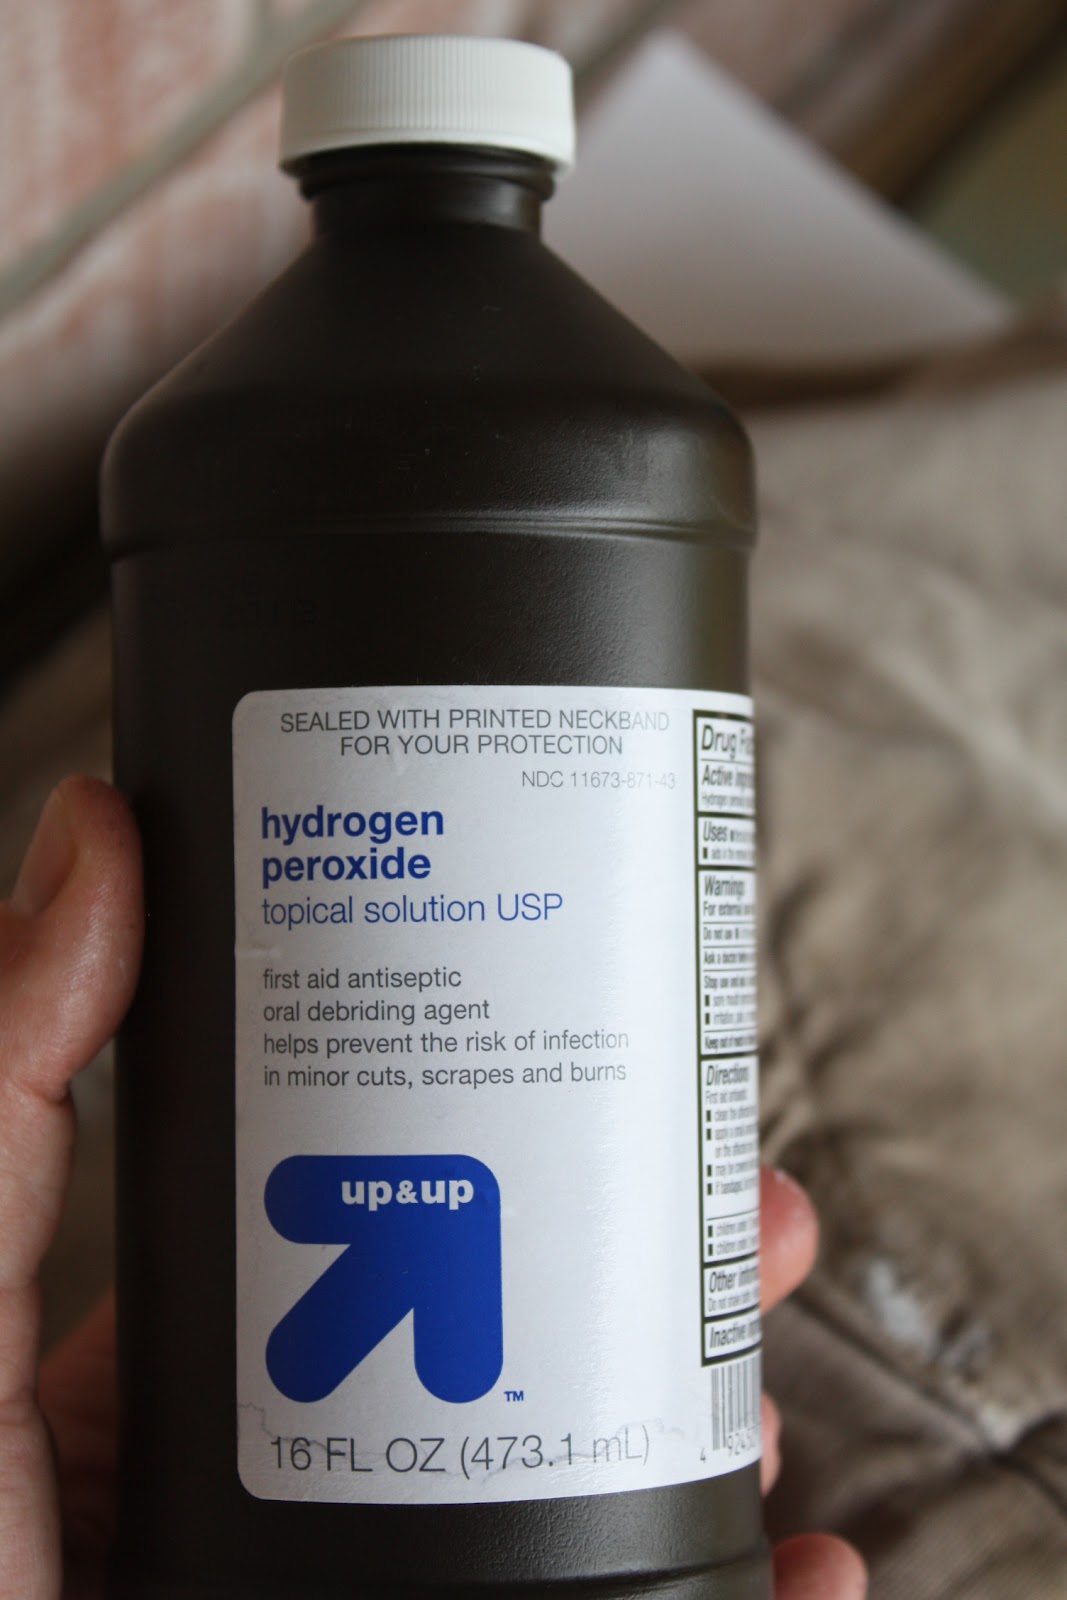 Get Color Bleed Out of Clothes With Hydrogen Peroxide - Bulk Peroxide